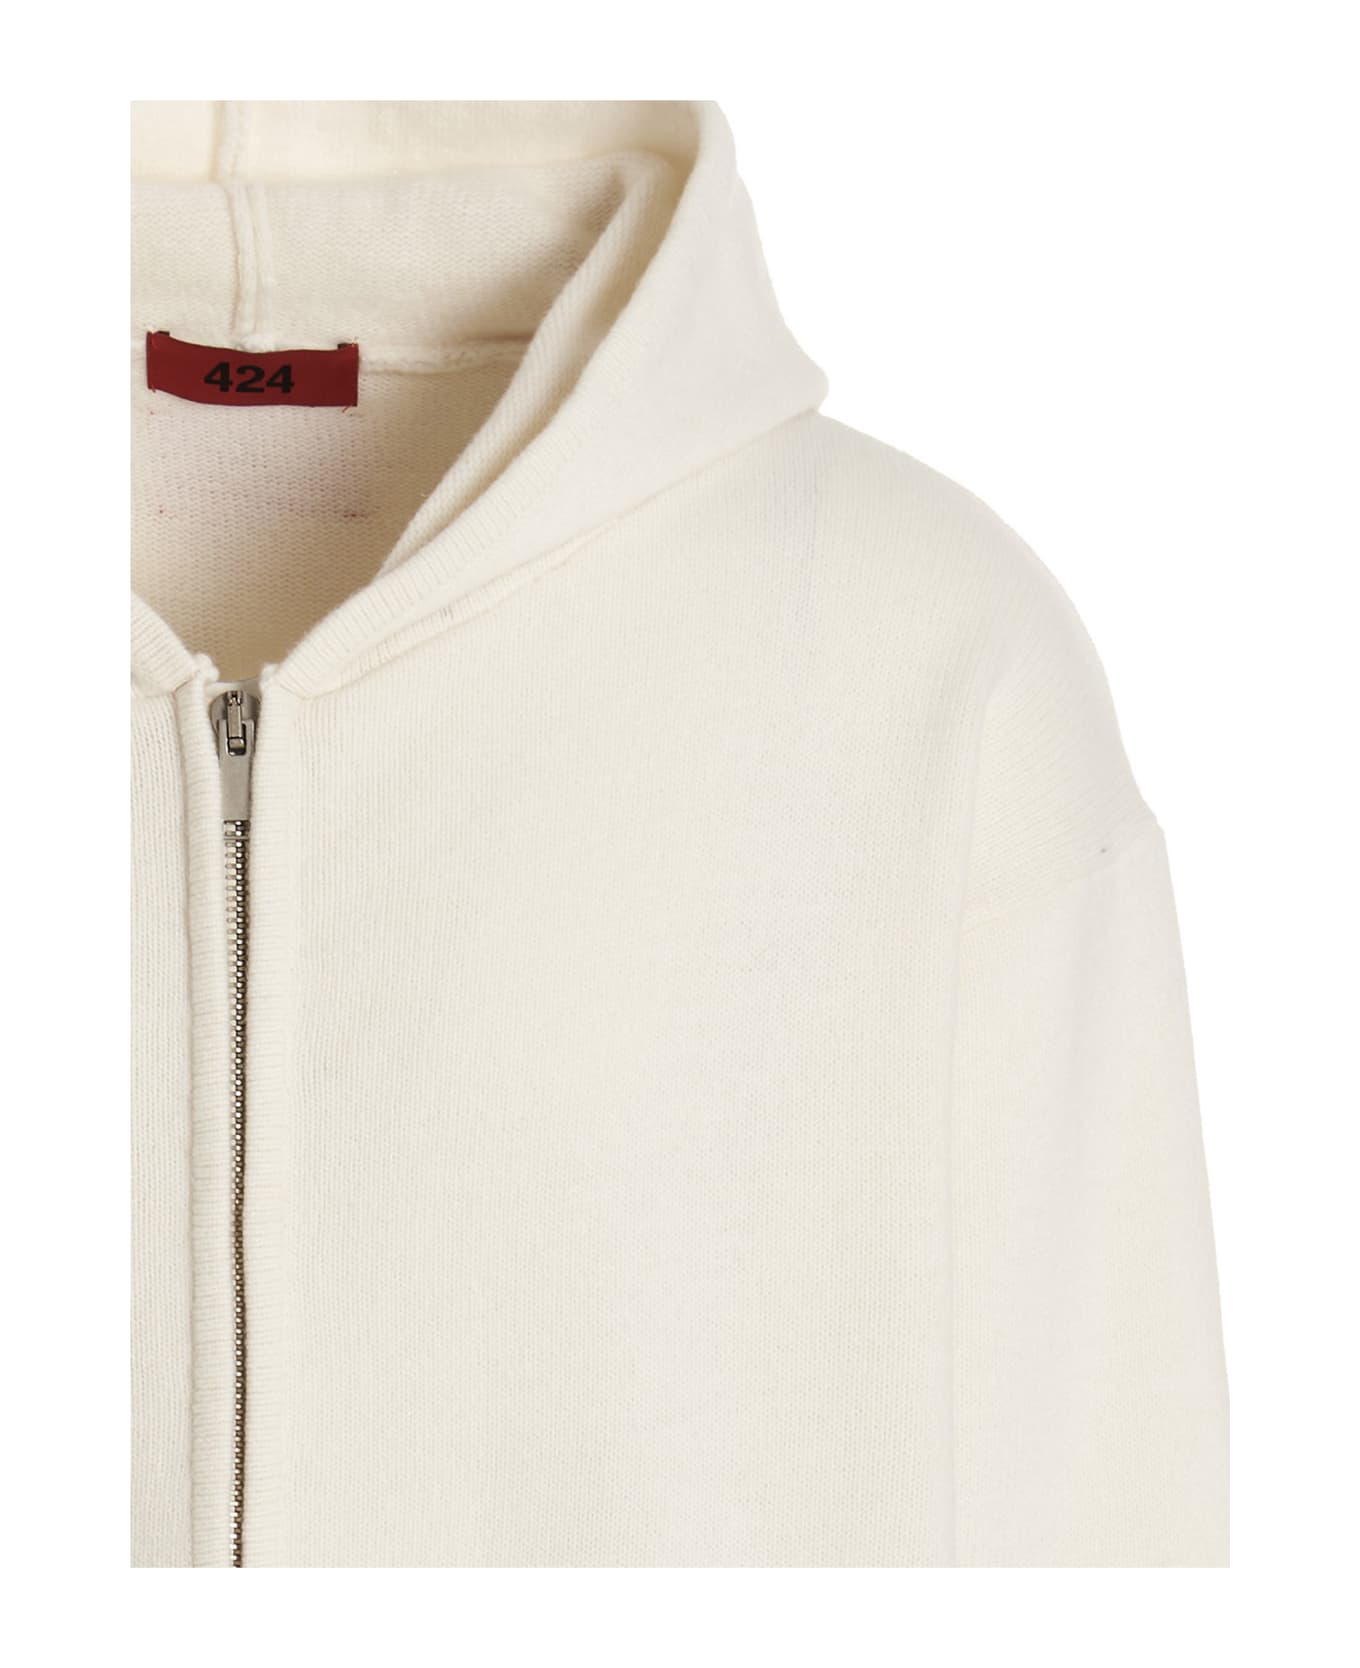 FourTwoFour on Fairfax Embroidery Hooded Cardigan - Bianco